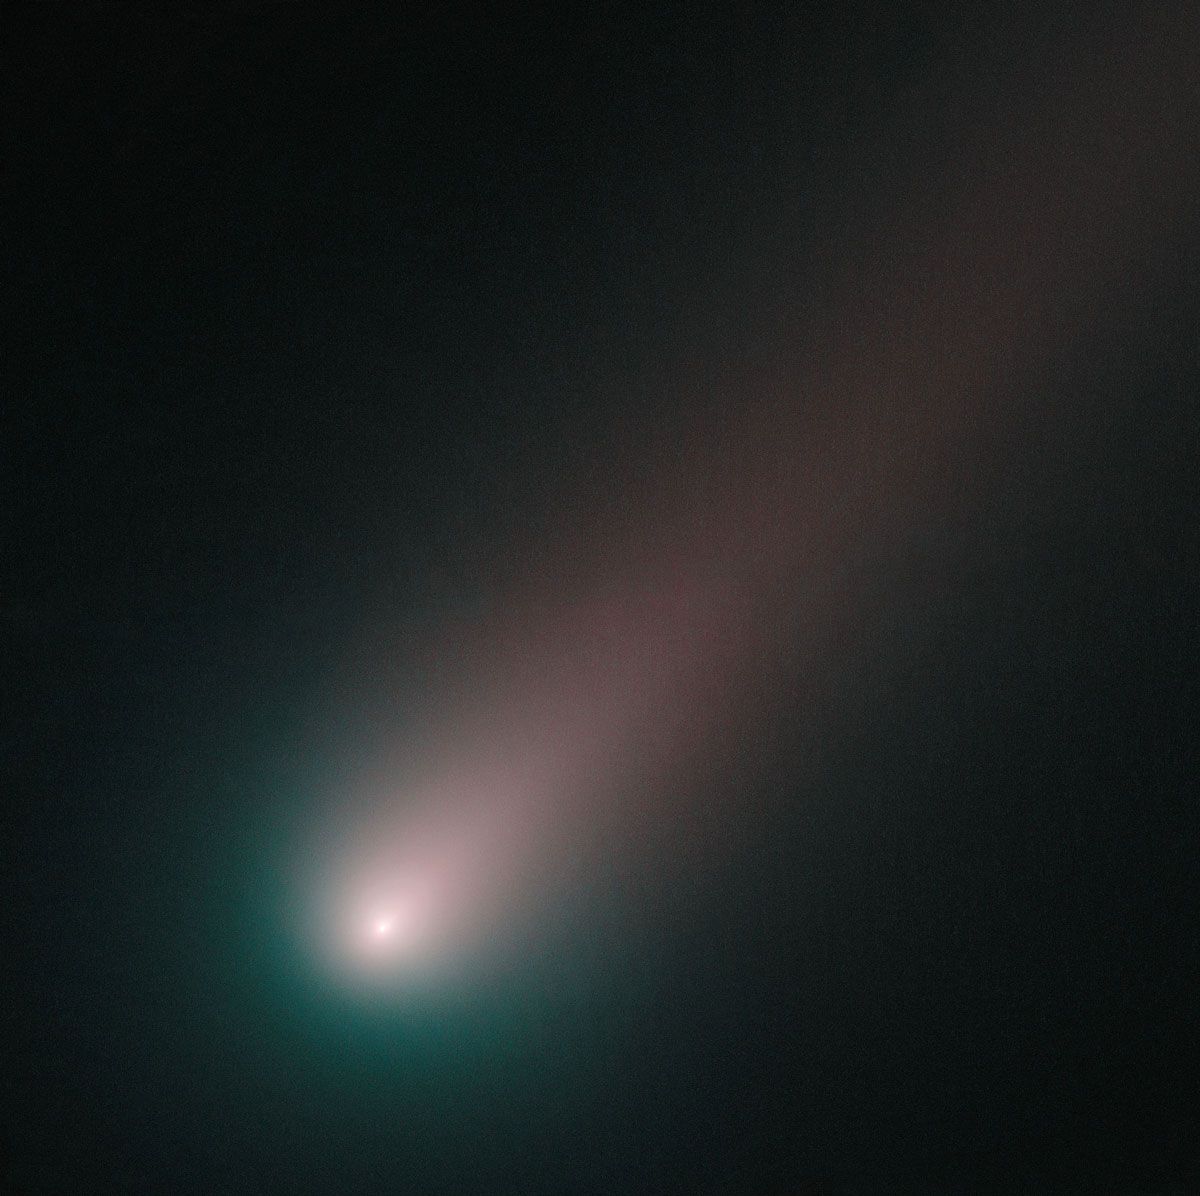 Comet ISON photographed by NASA